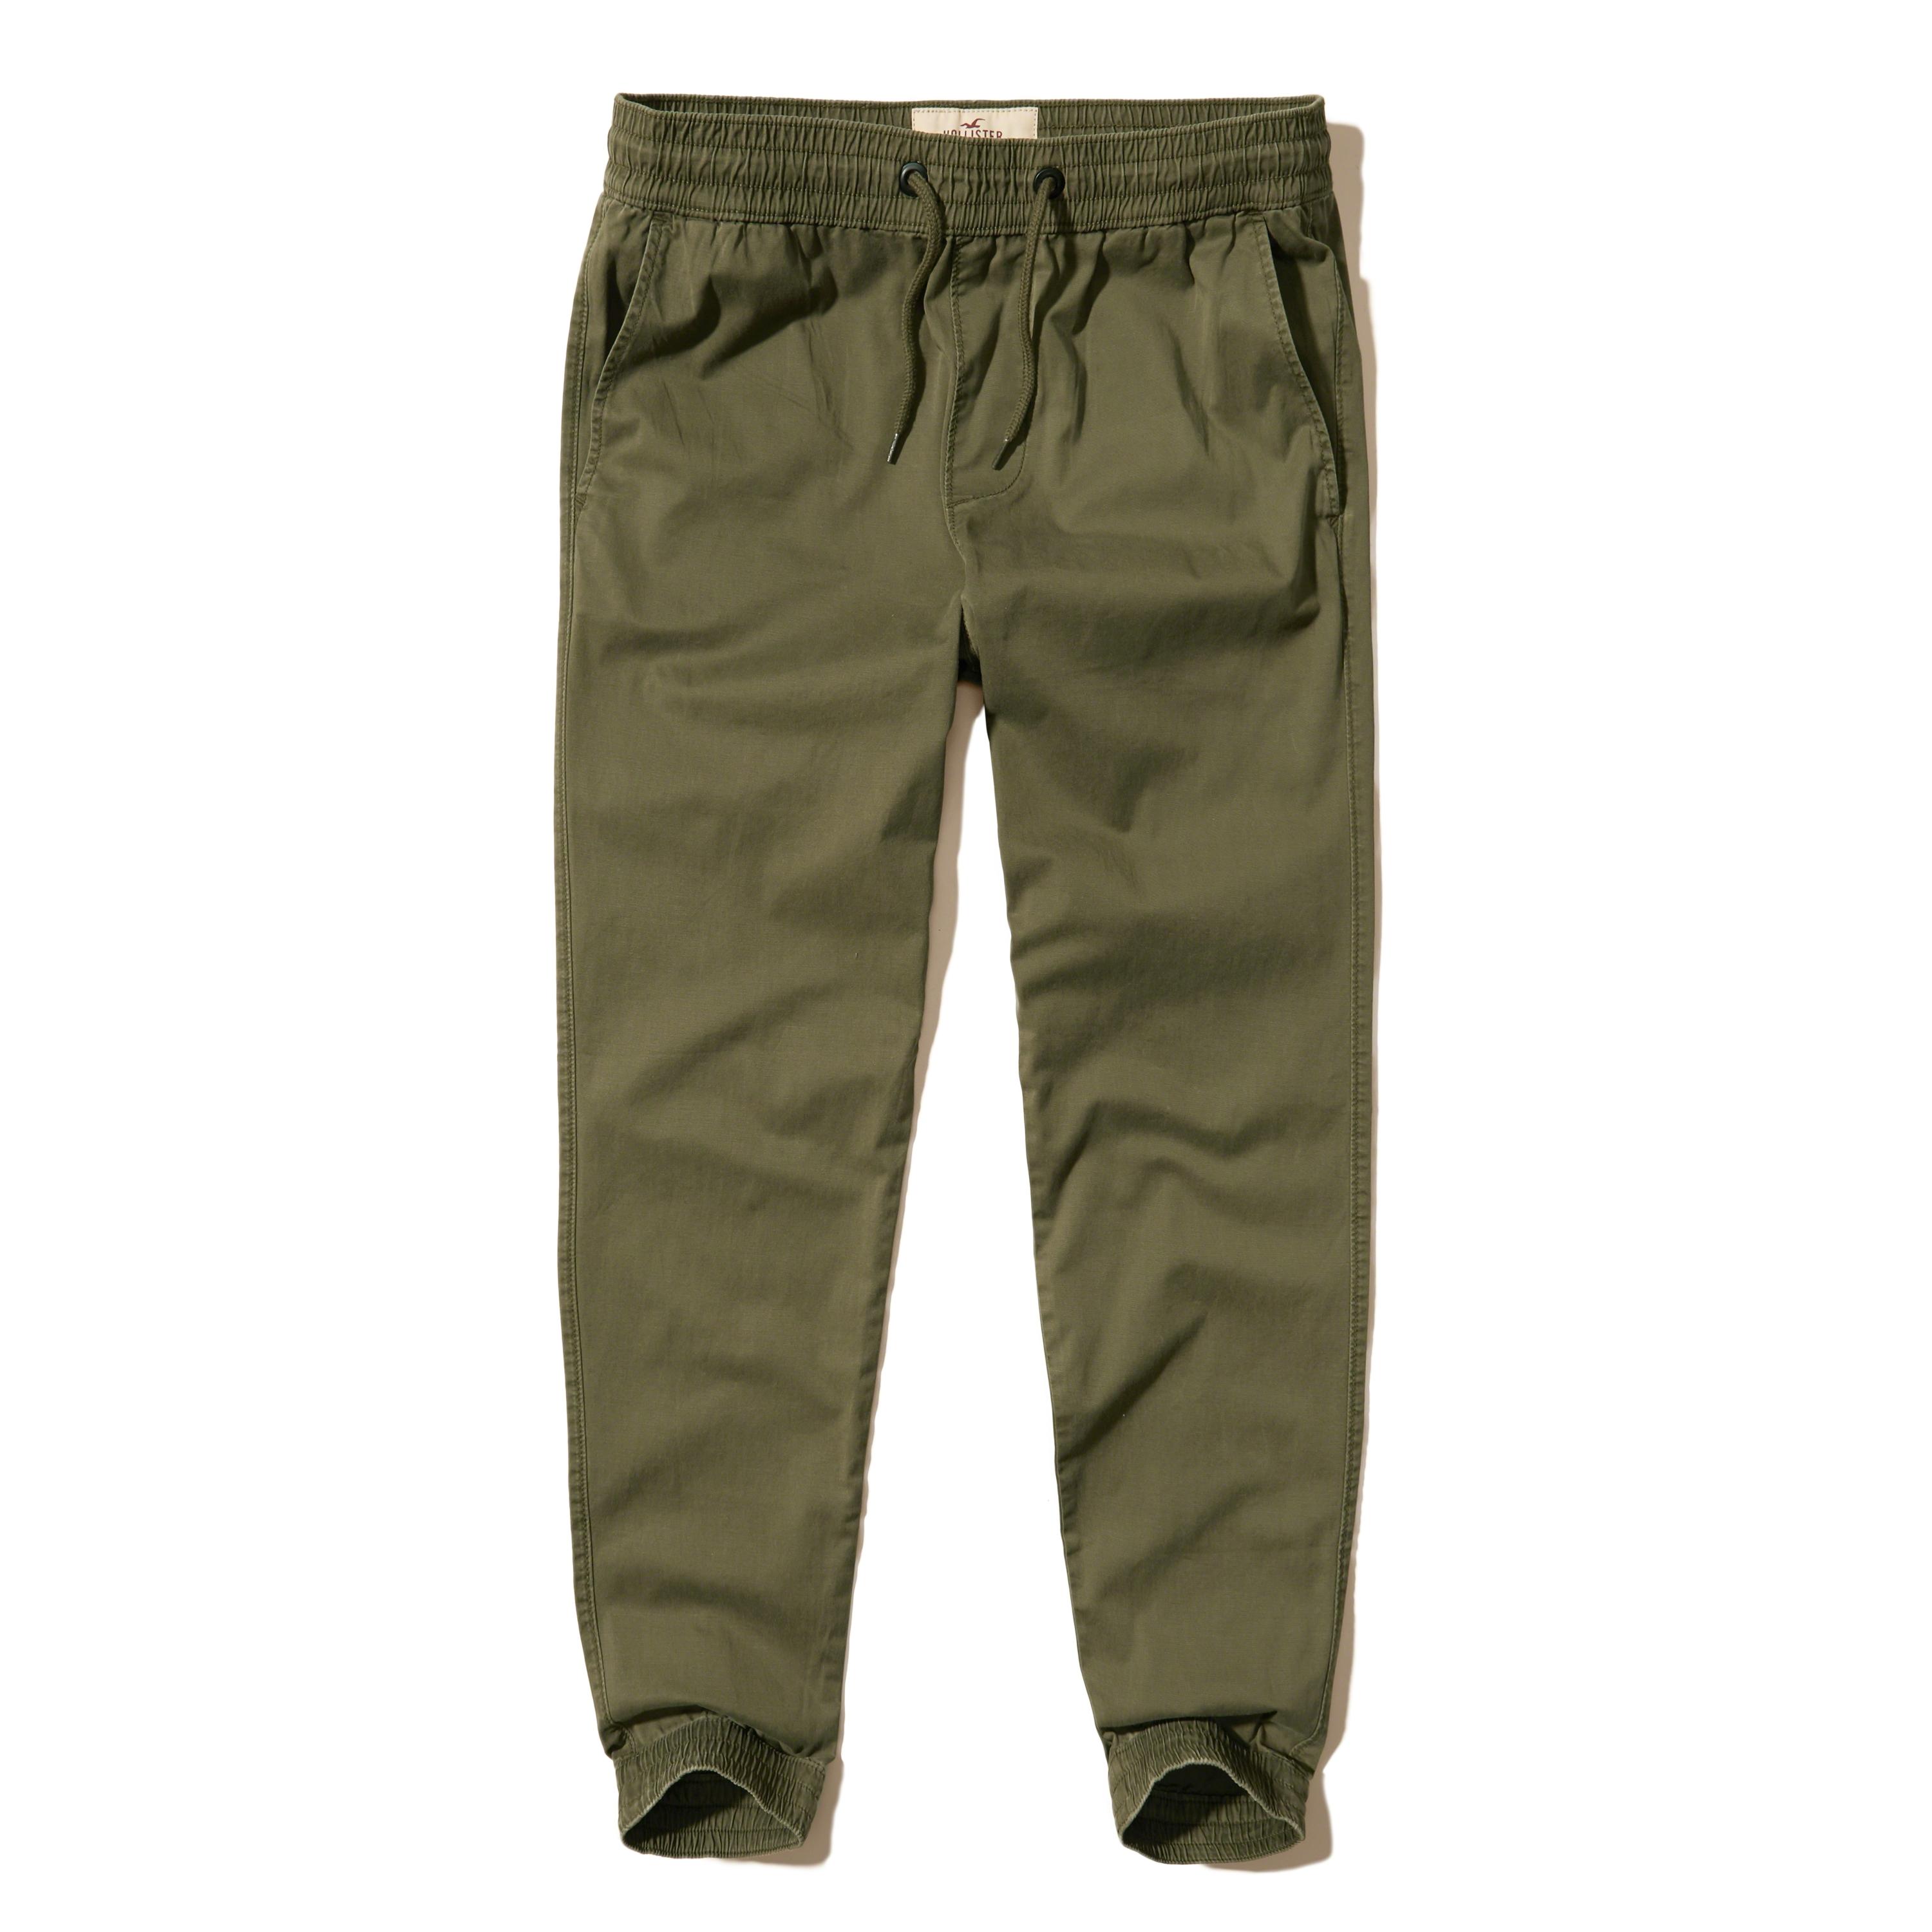 Lyst - Hollister Twill Jogger Pants in Green for Men